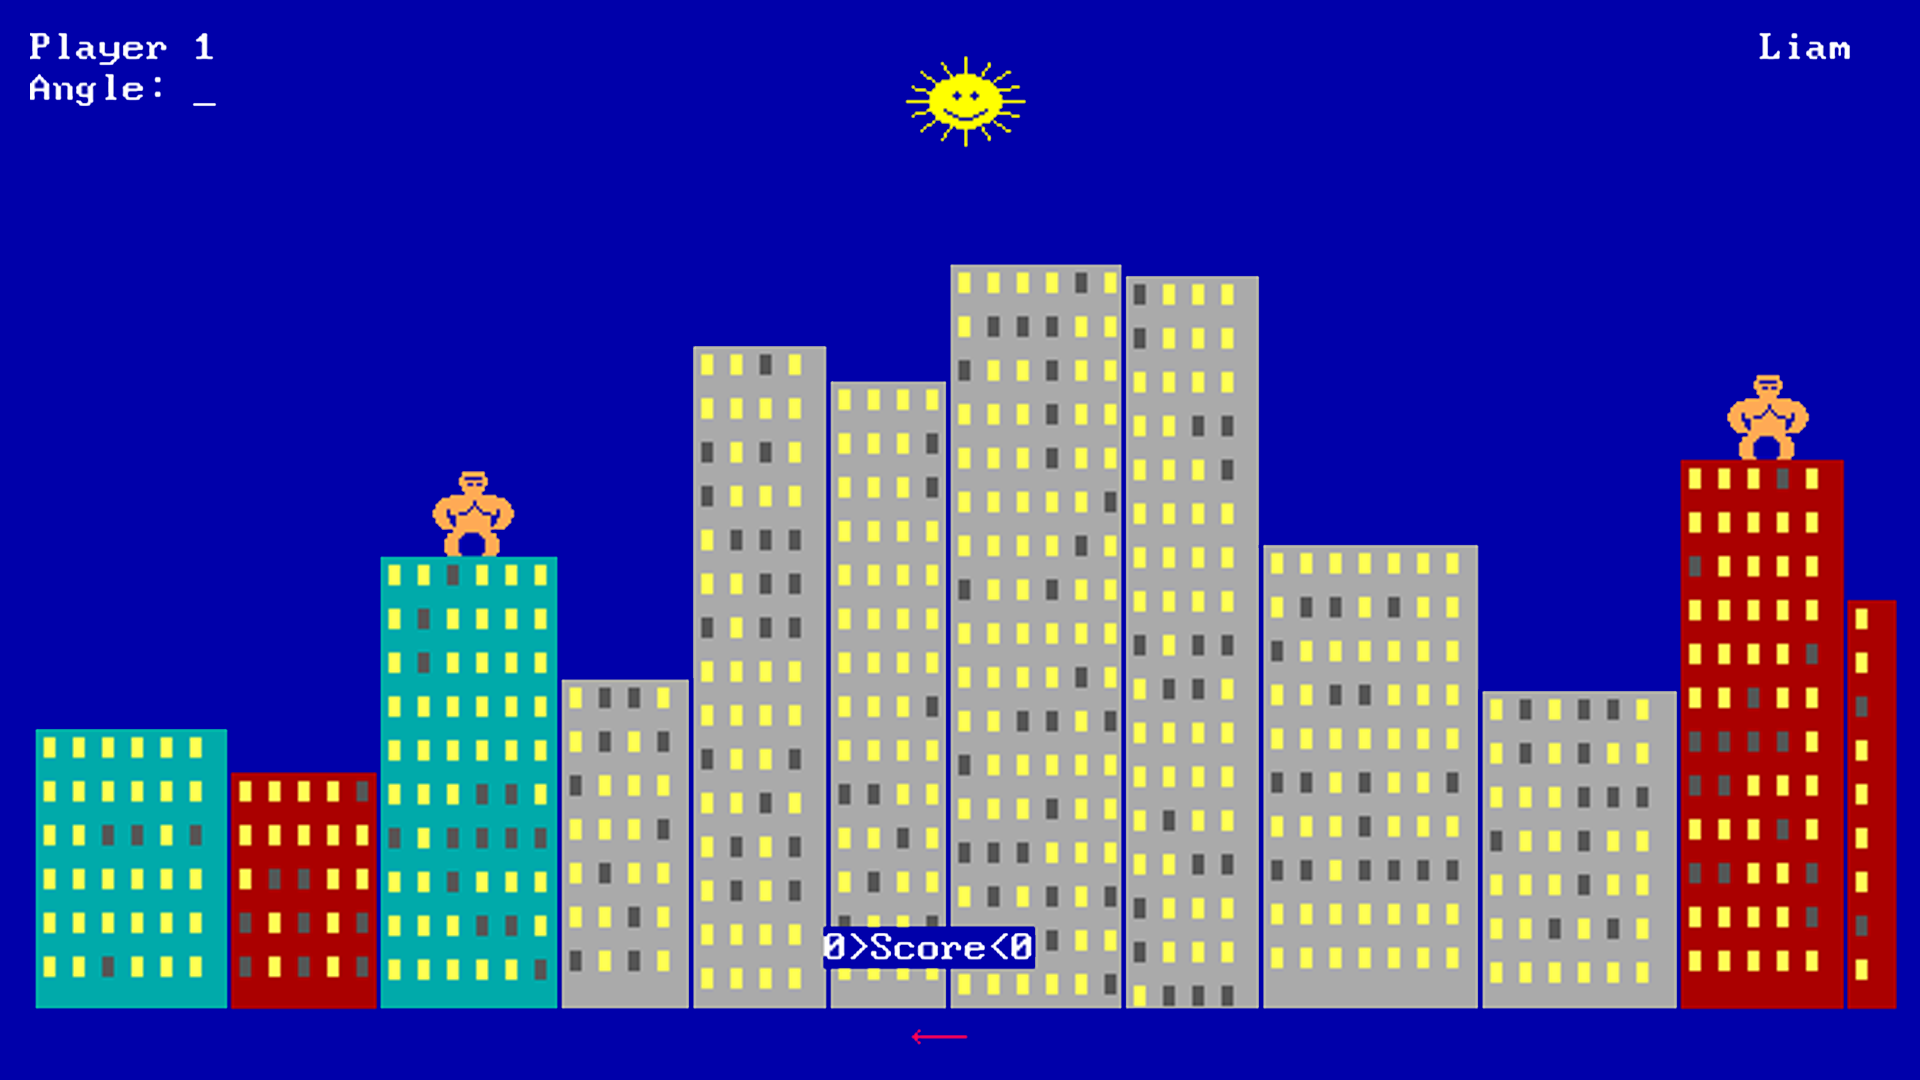 Two gorillas face off against one another in Qbasic Gorillas